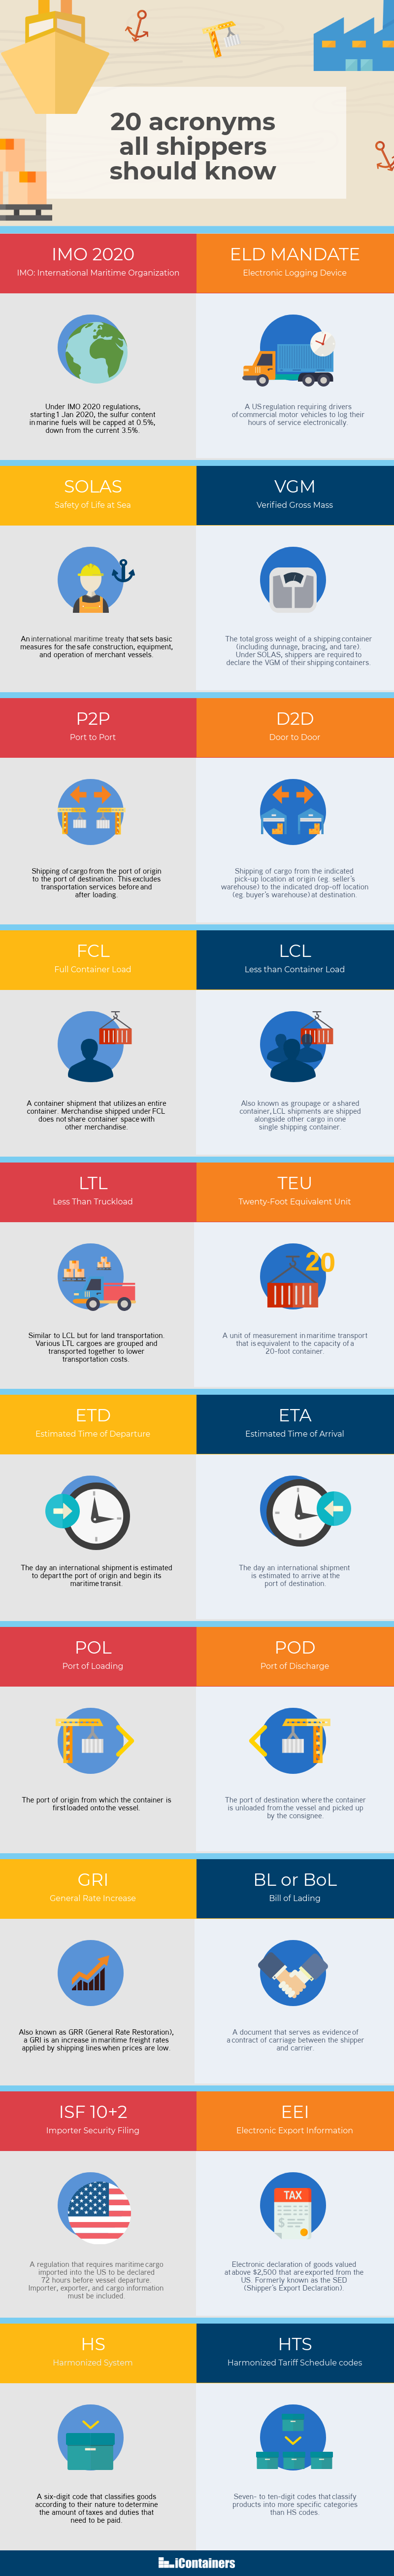 20 shipping acronyms all shippers should know infographic